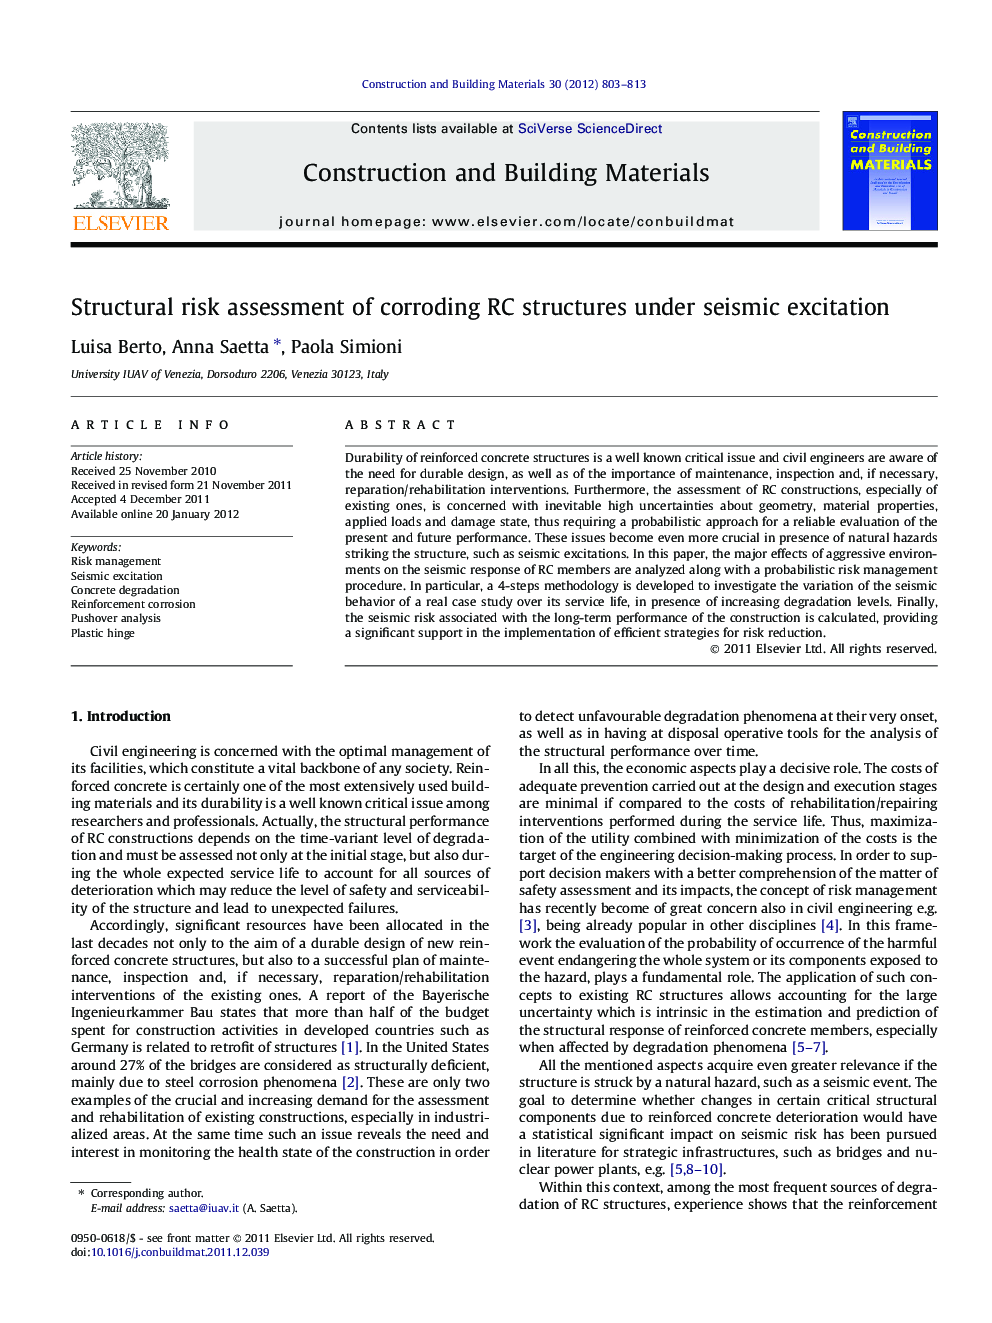 Structural risk assessment of corroding RC structures under seismic excitation